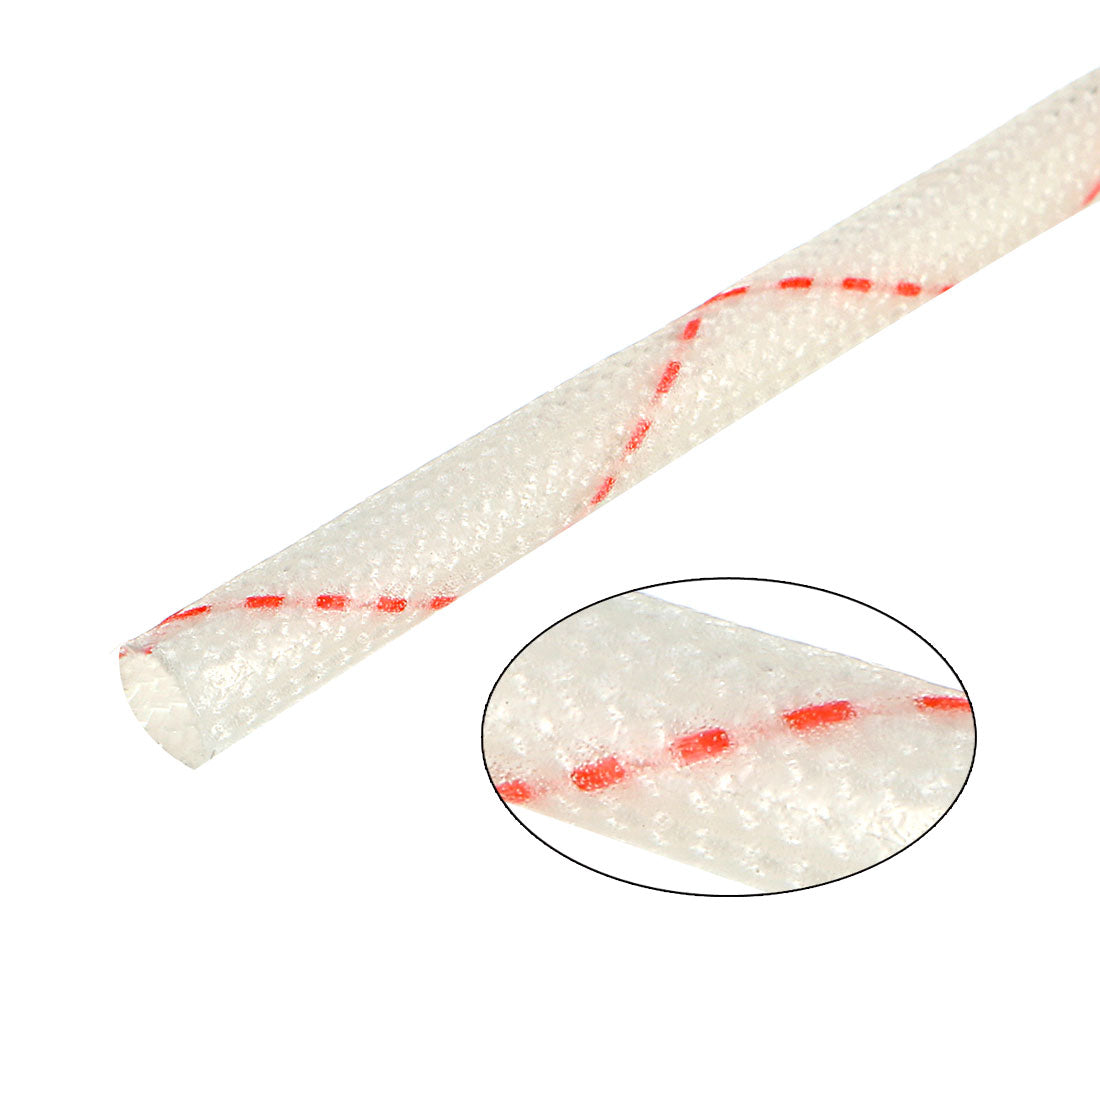 uxcell Uxcell Fiberglass Sleeve 3mm I.D. PVC Insulation Tubing 1500V Tube Adjustable Sleeving Pipe 125 Degree Centigrade Cable Wrap Wire 905mm 2.97ft White and Red